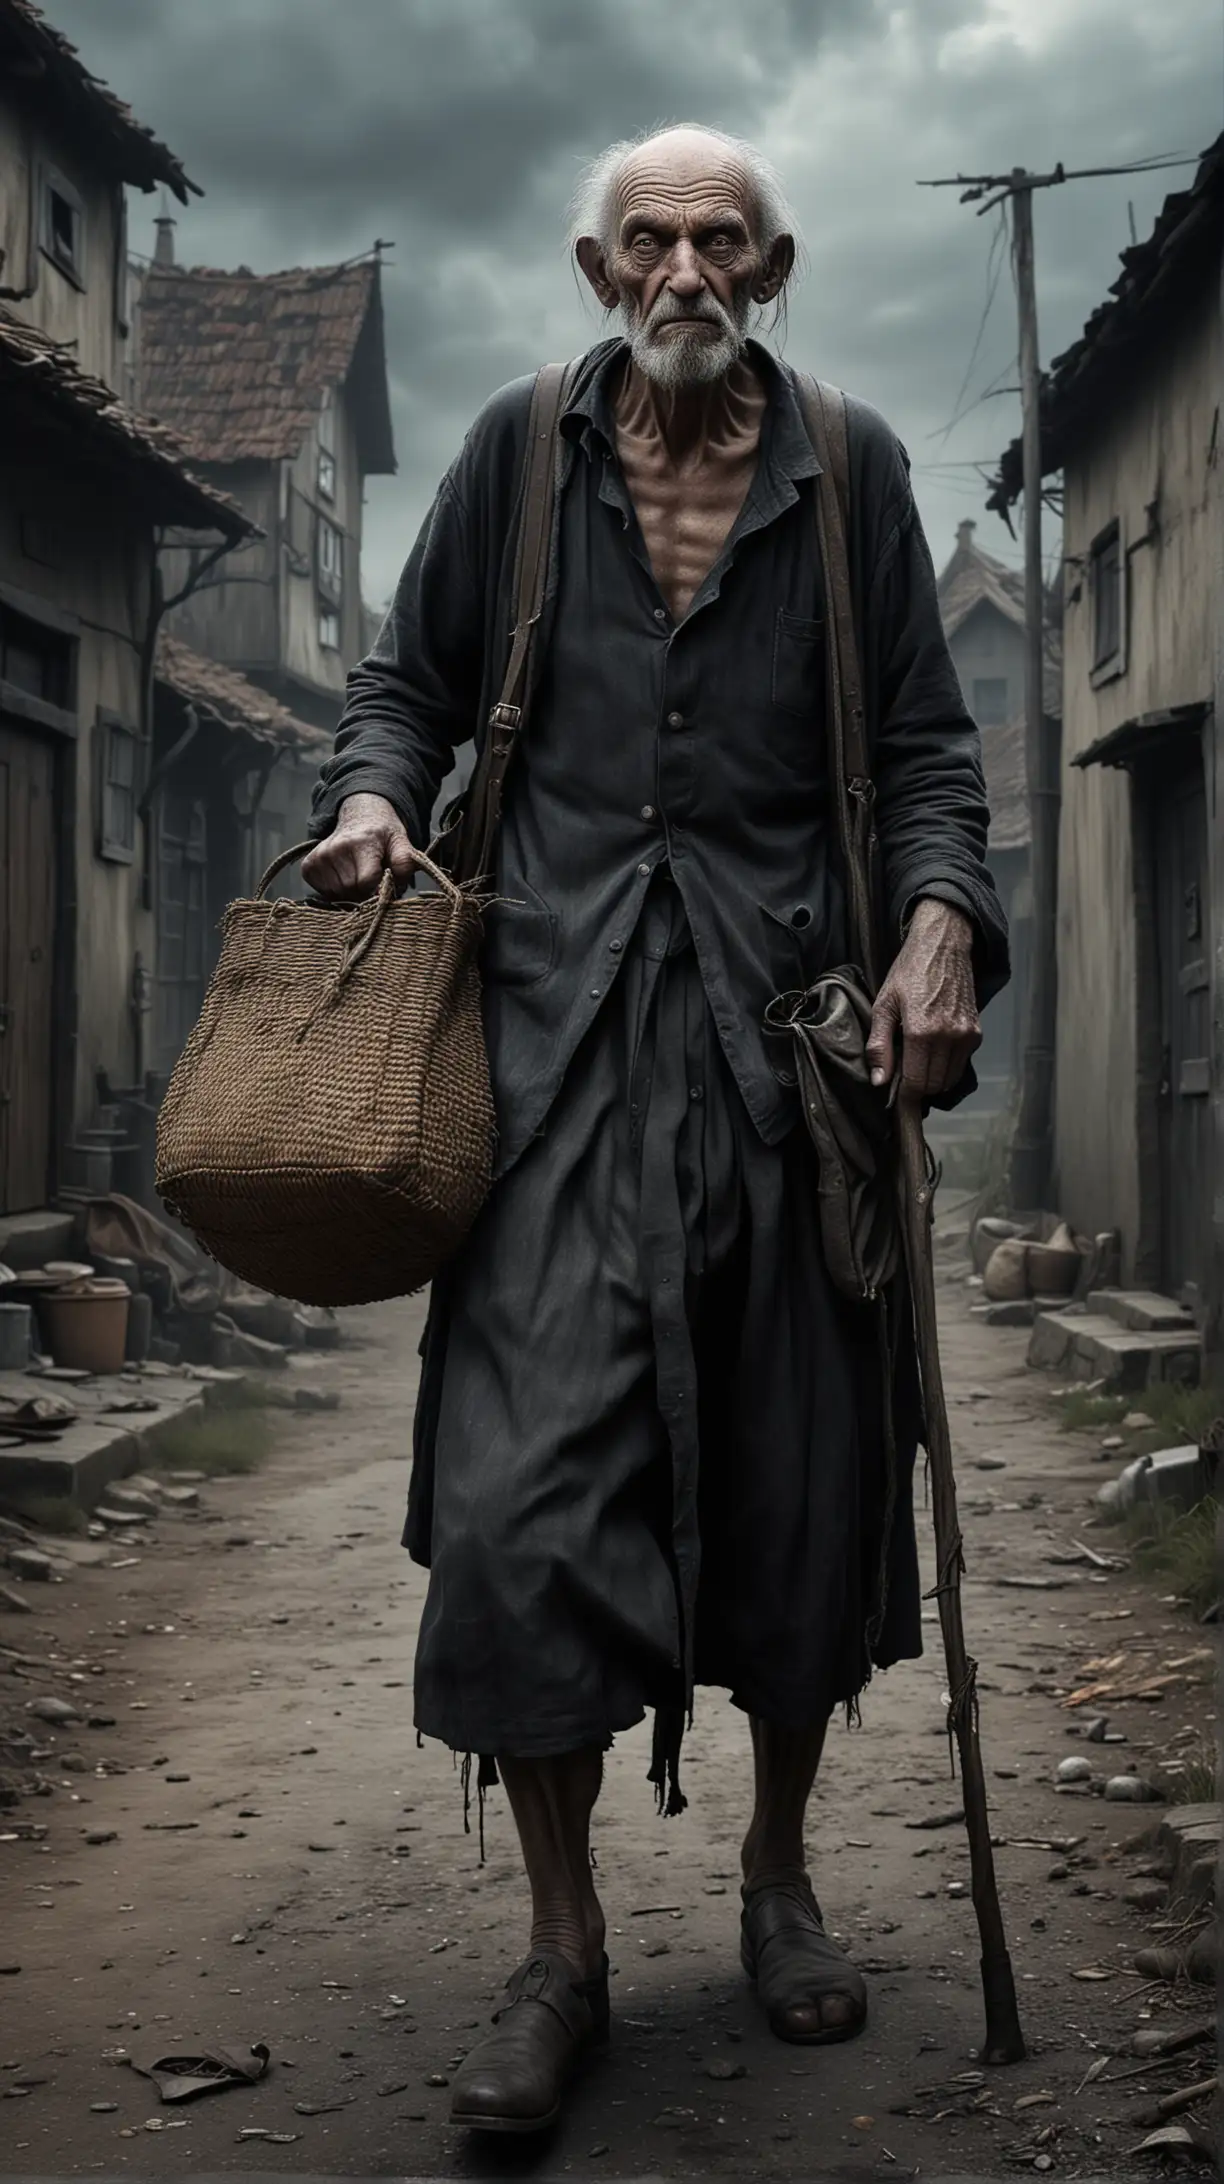 Sinister Medieval Villager with Bag and Cane in Dark Horror Setting